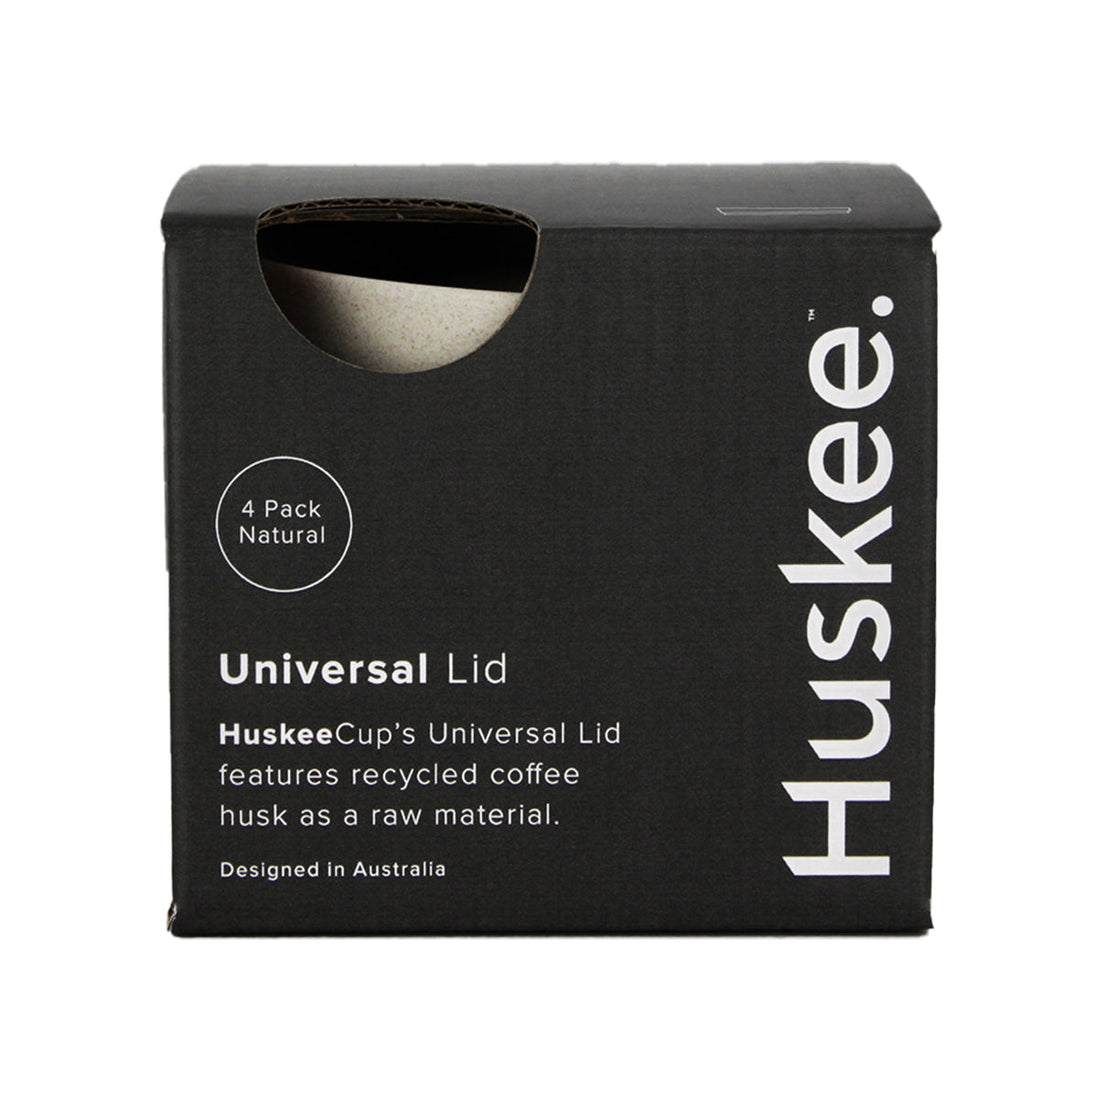 Huskee, Huskee Reusable Lids for Huskee Coffee Cups 4 Pack - Natural, Redber Coffee